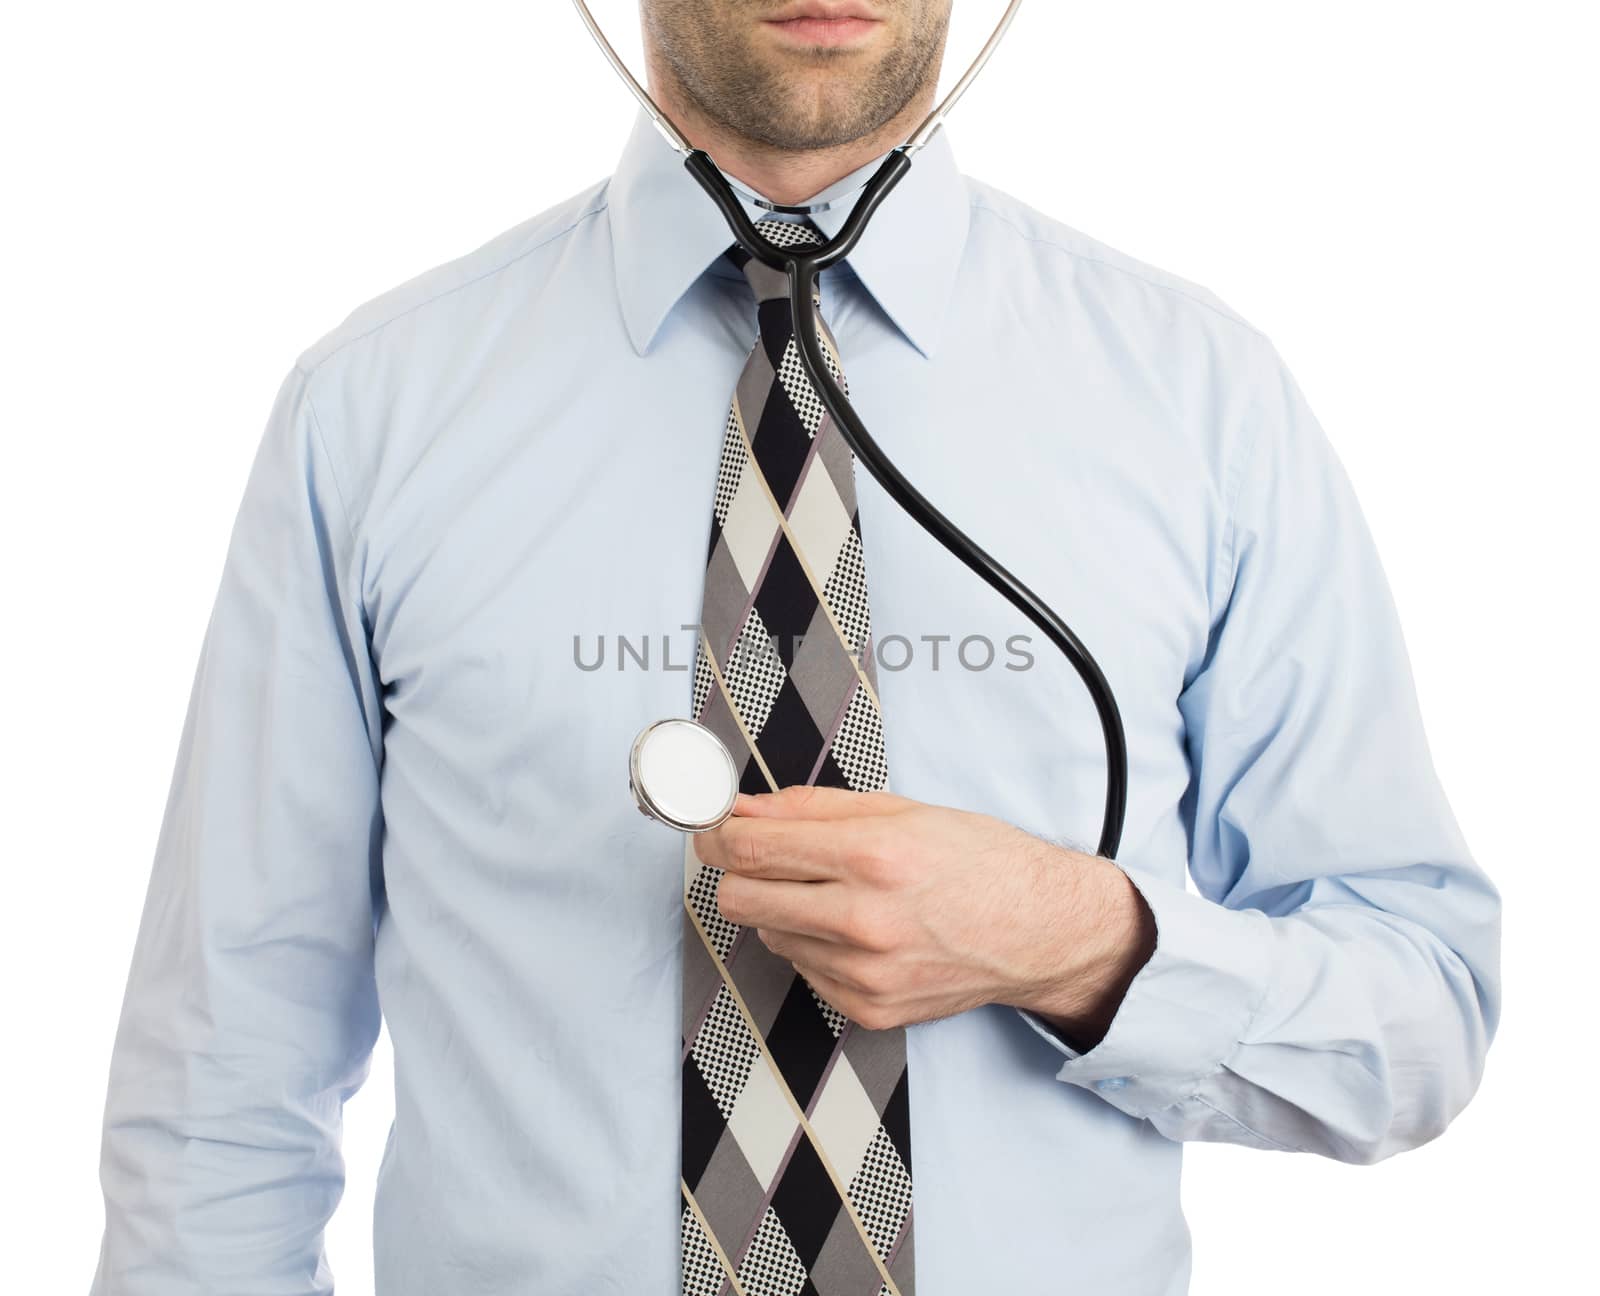 Doctor with stethoscope, isolated on white background